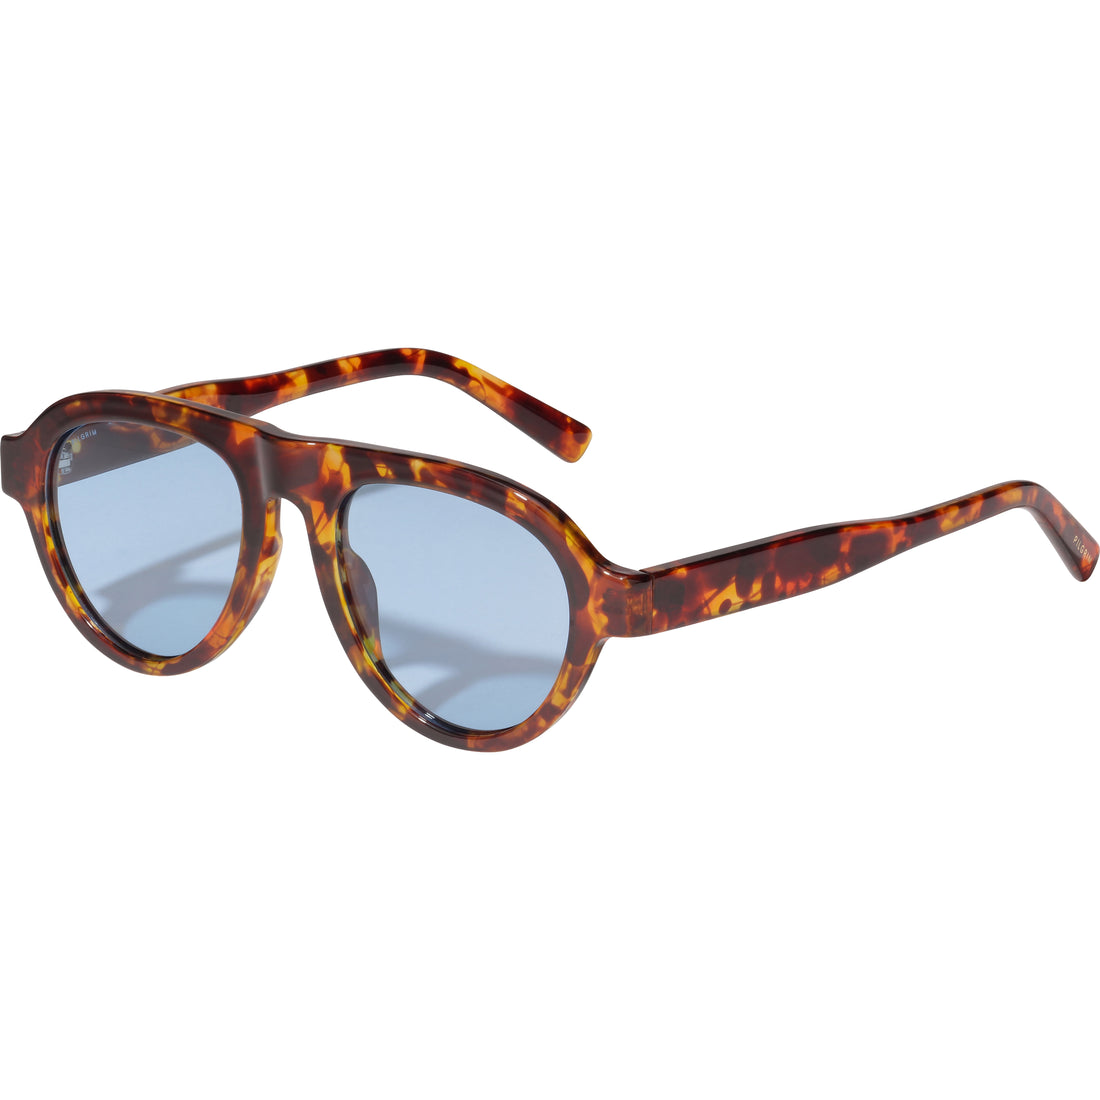 YARIL recycled sunglasses tortoise brown